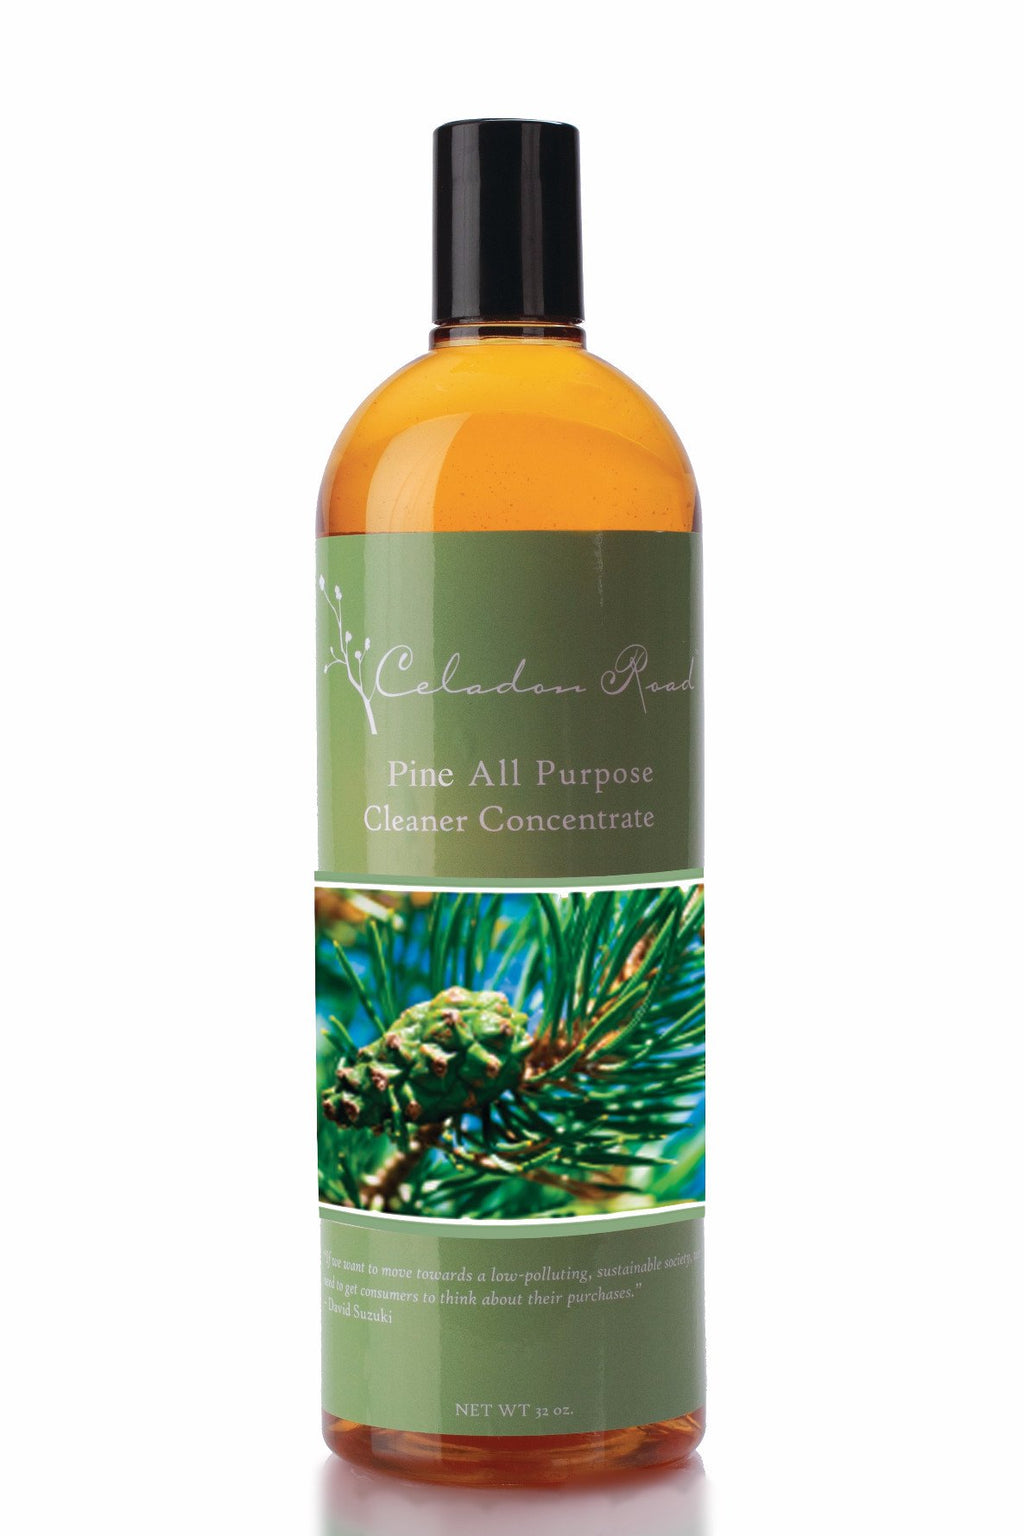 Pine All Purpose Cleaner Concentrate- Celadon Road- www.celadonroad.com